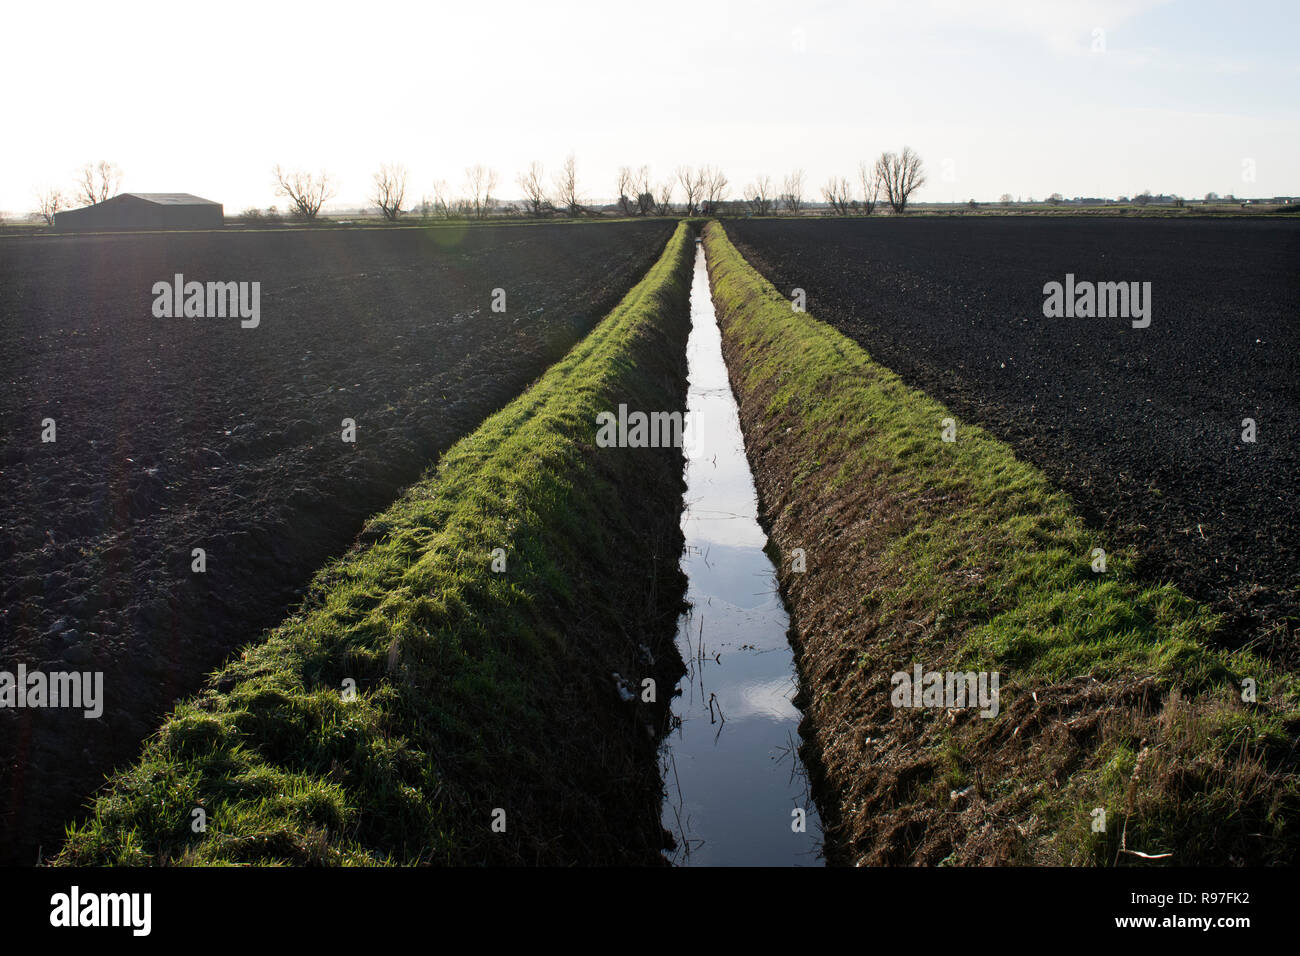 Fens East Anglia fenland landscape a dyke a drainage ditch. 2010s Southerly Norfolk UK 2018 HOMER SYKES Stock Photo